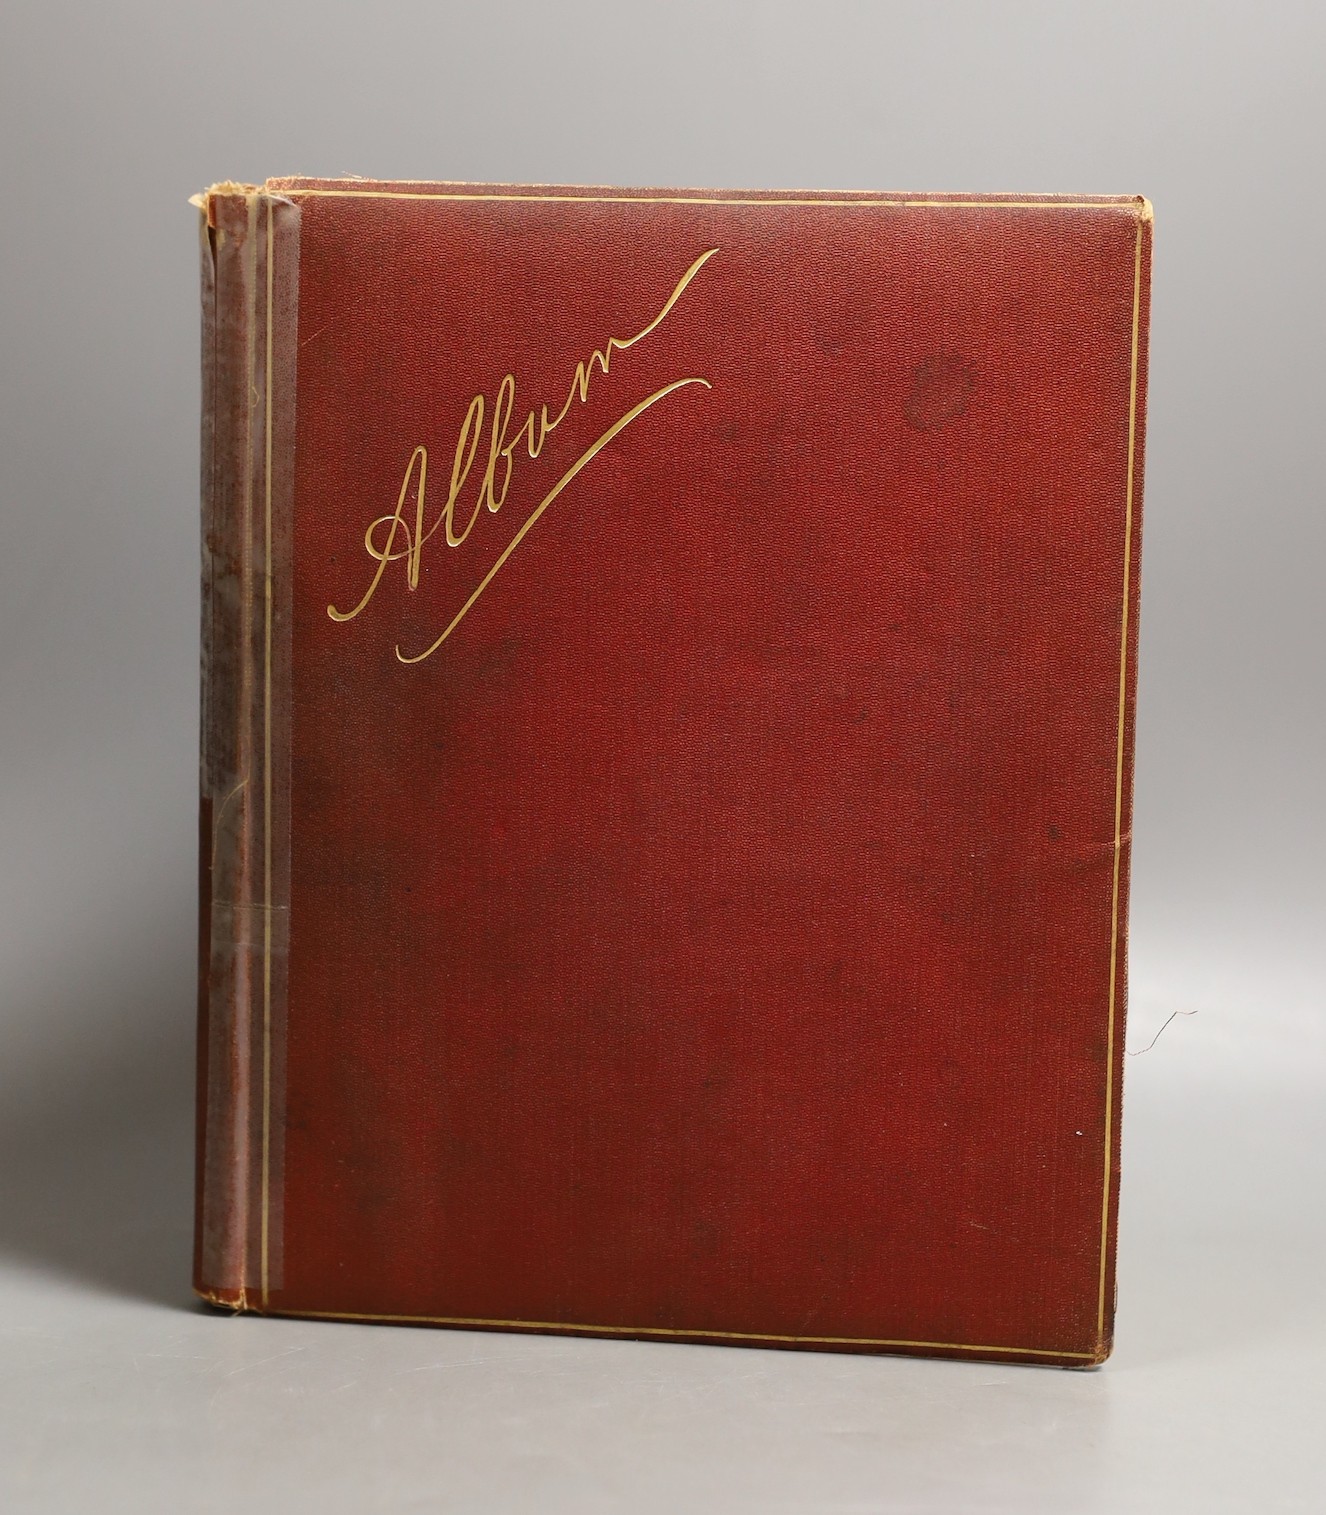 A 1920-1940s autograph album including a Bruce Bairnsfather signed Old Bill sketch, signatures of General Omar N. Bradley and some of his staff officers from the US army, mounted Adolf Hitler and Hermann Göring letters w